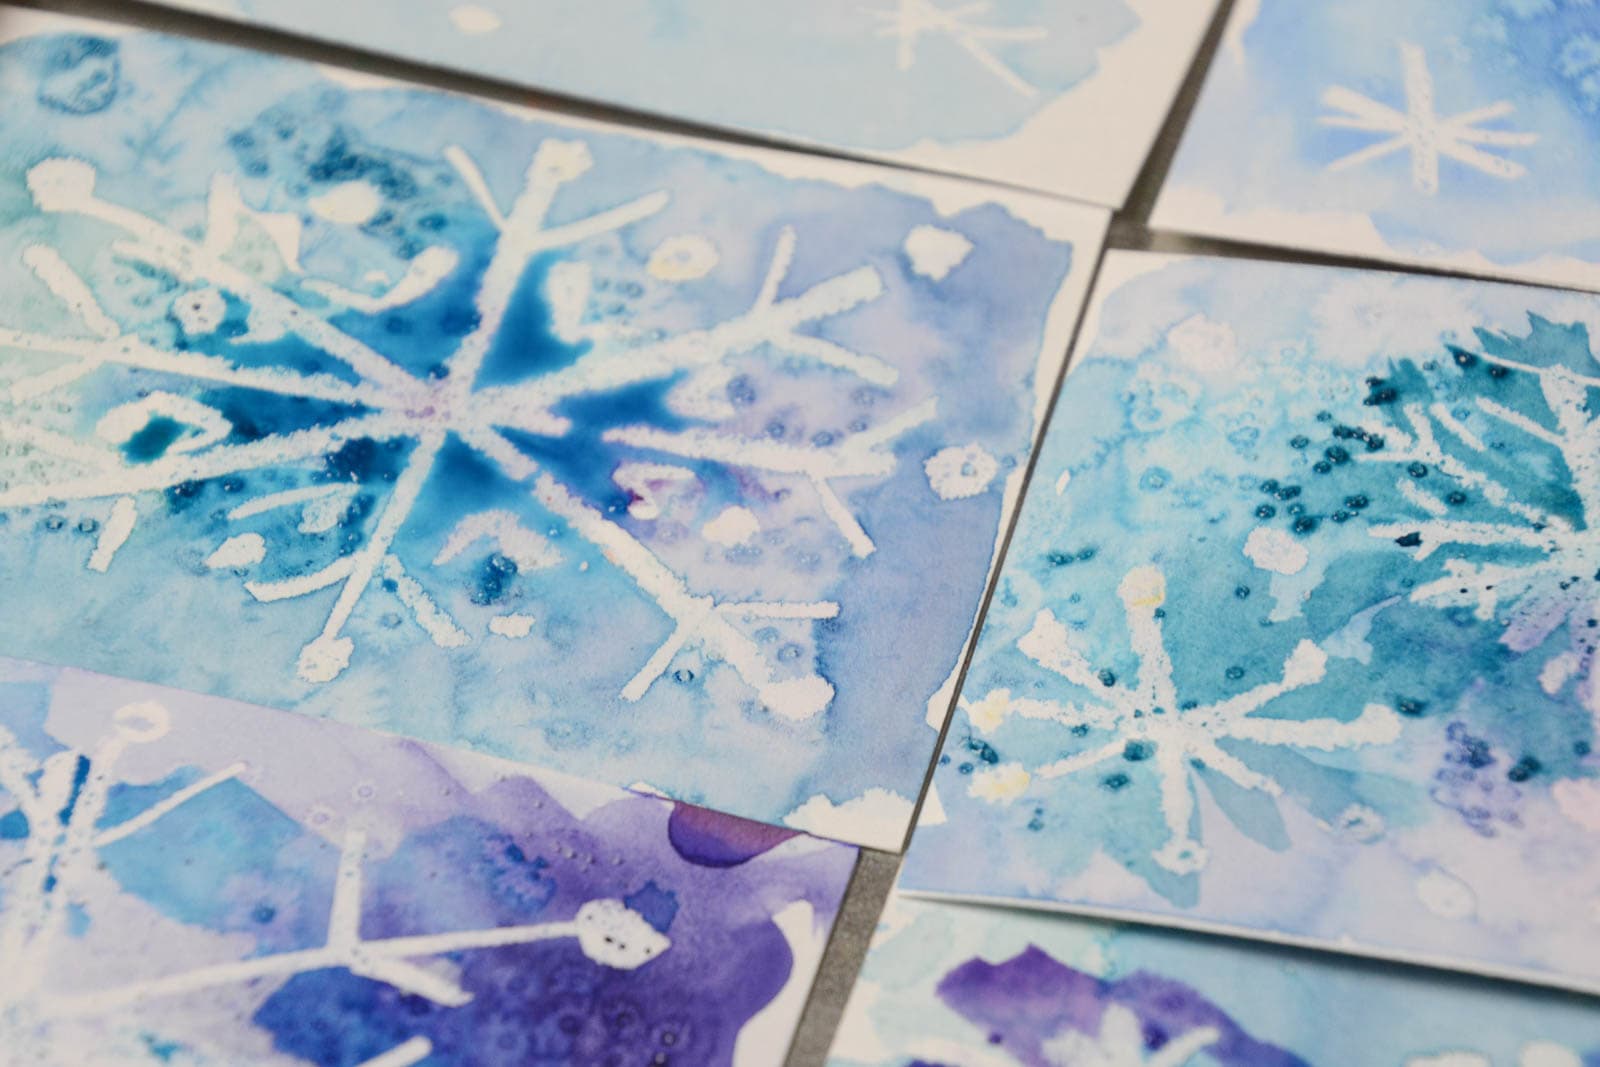 white snowflakes on small papers painted with blue and purple watercolor paint and salt.